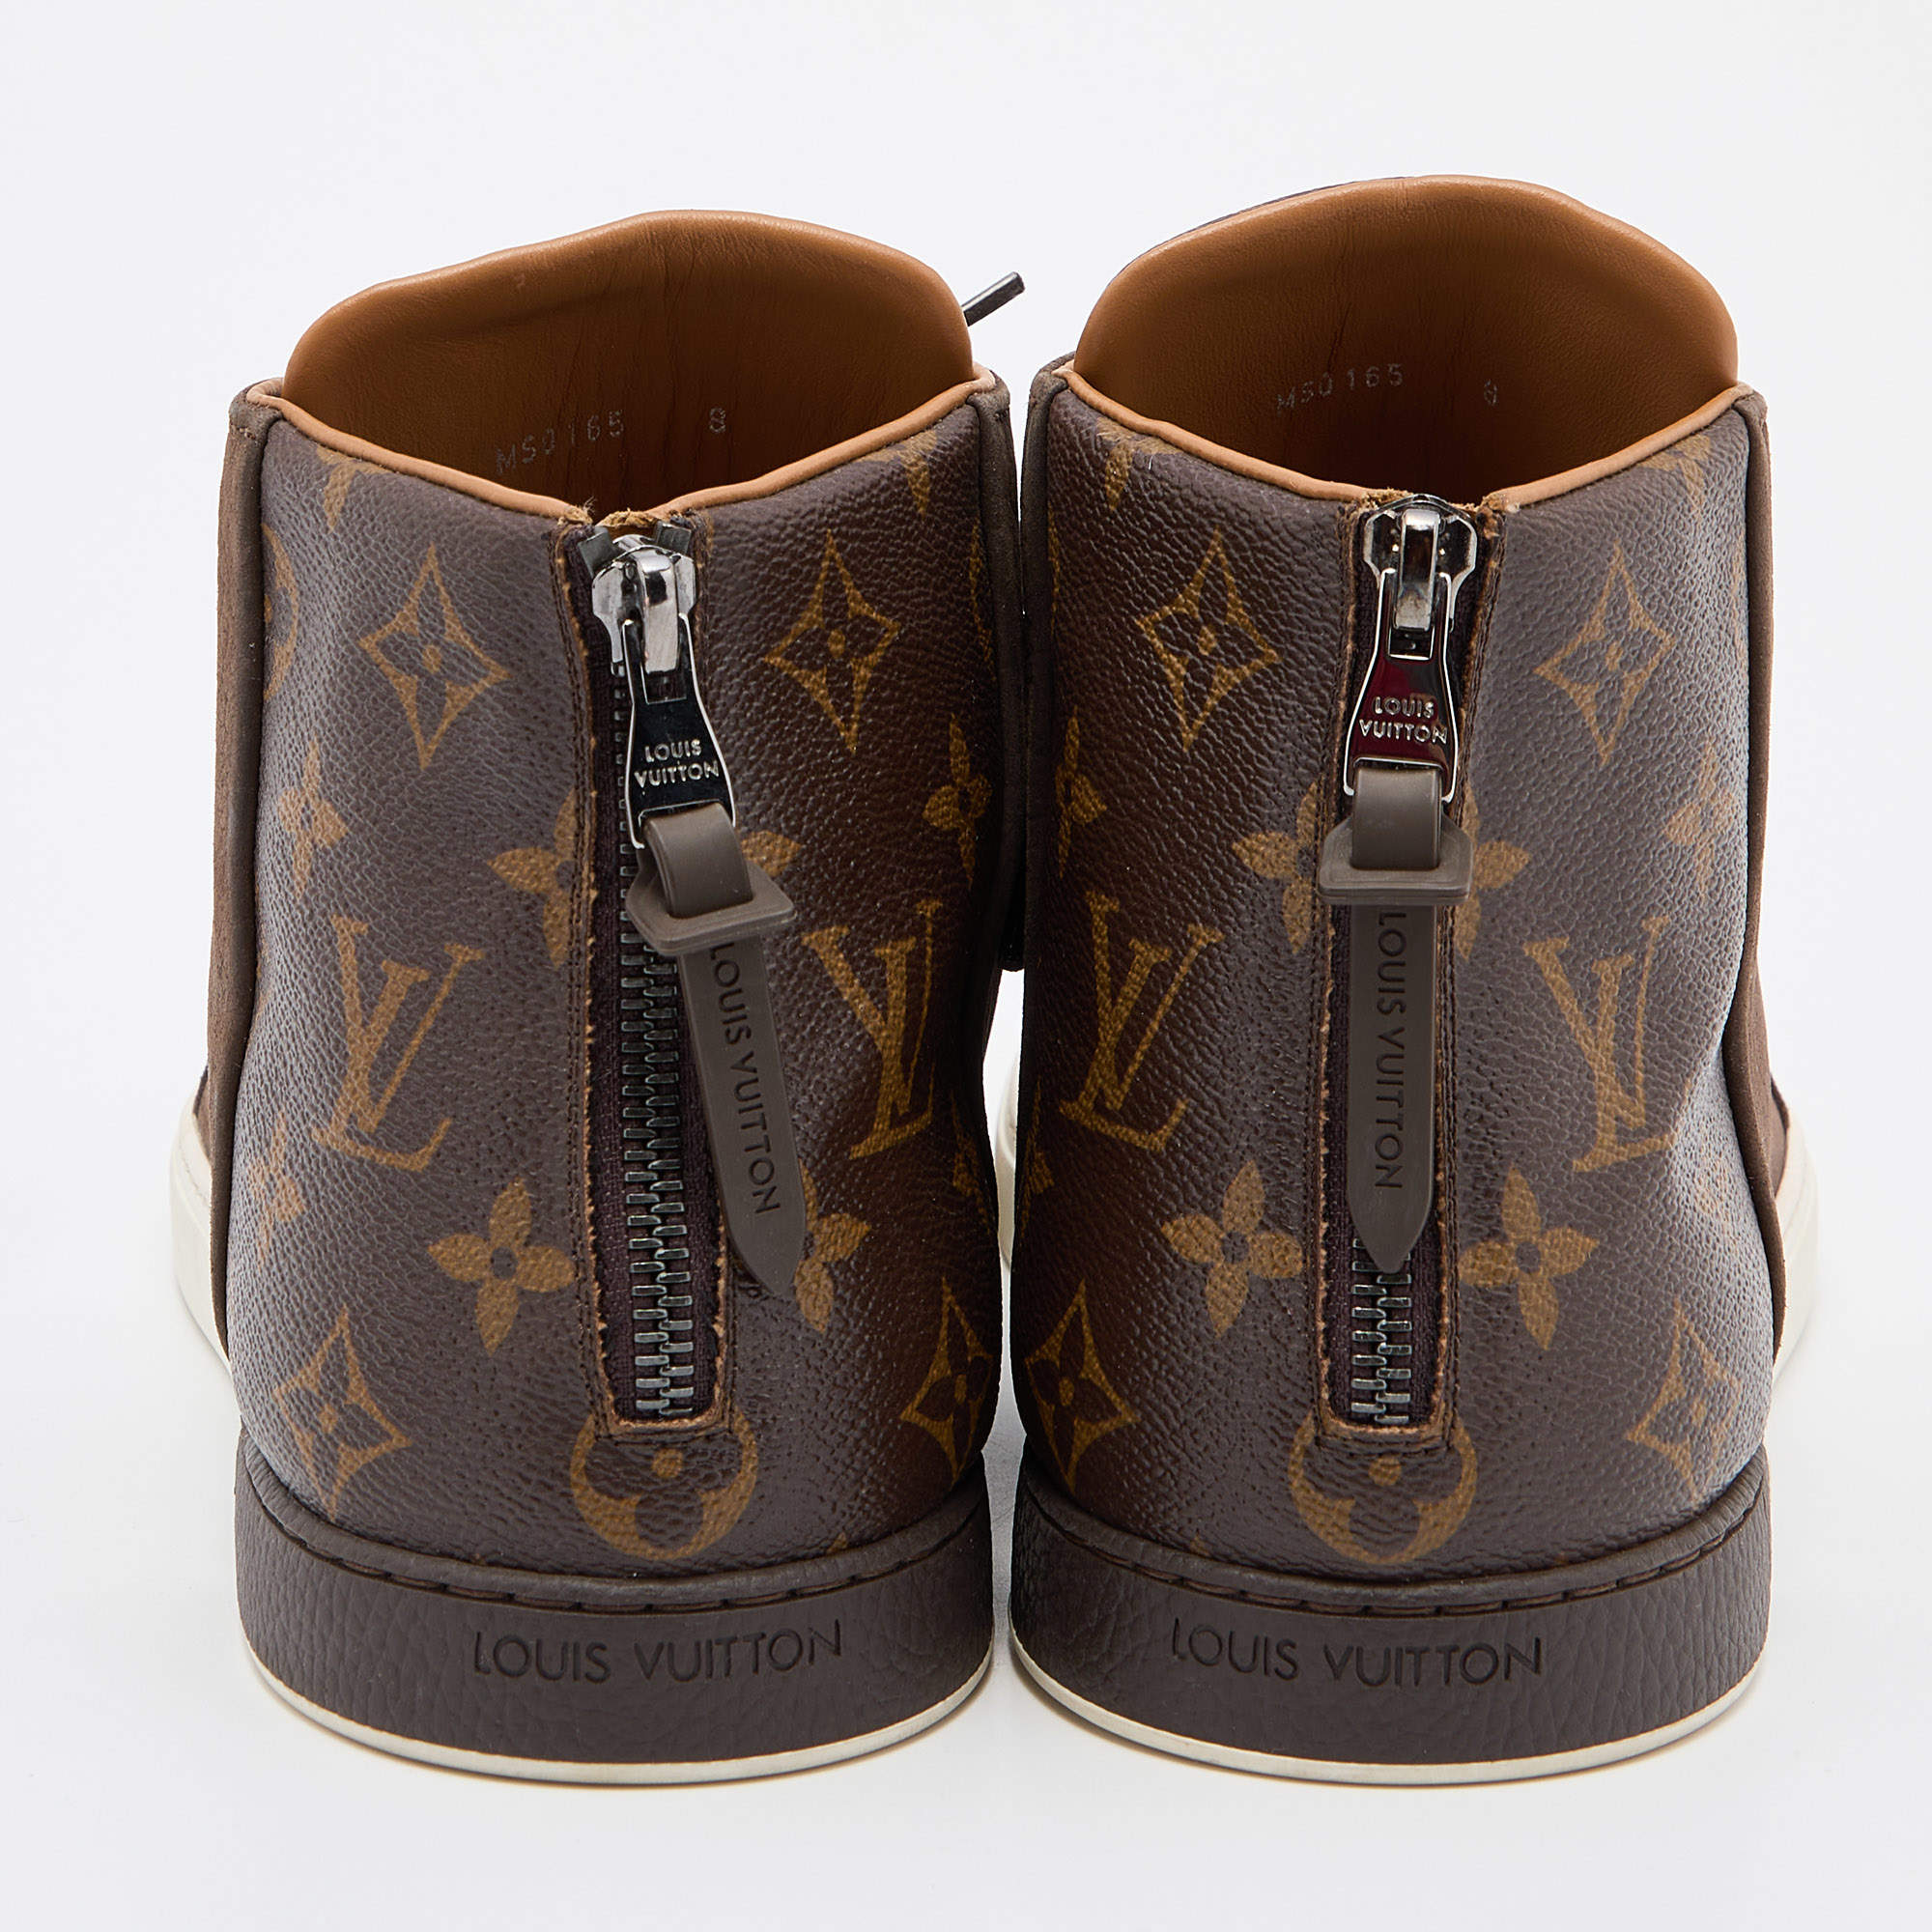 Louis Vuitton Brown Nubuck Leather and Monogram Coated Canvas High Top Sneakers Size 42